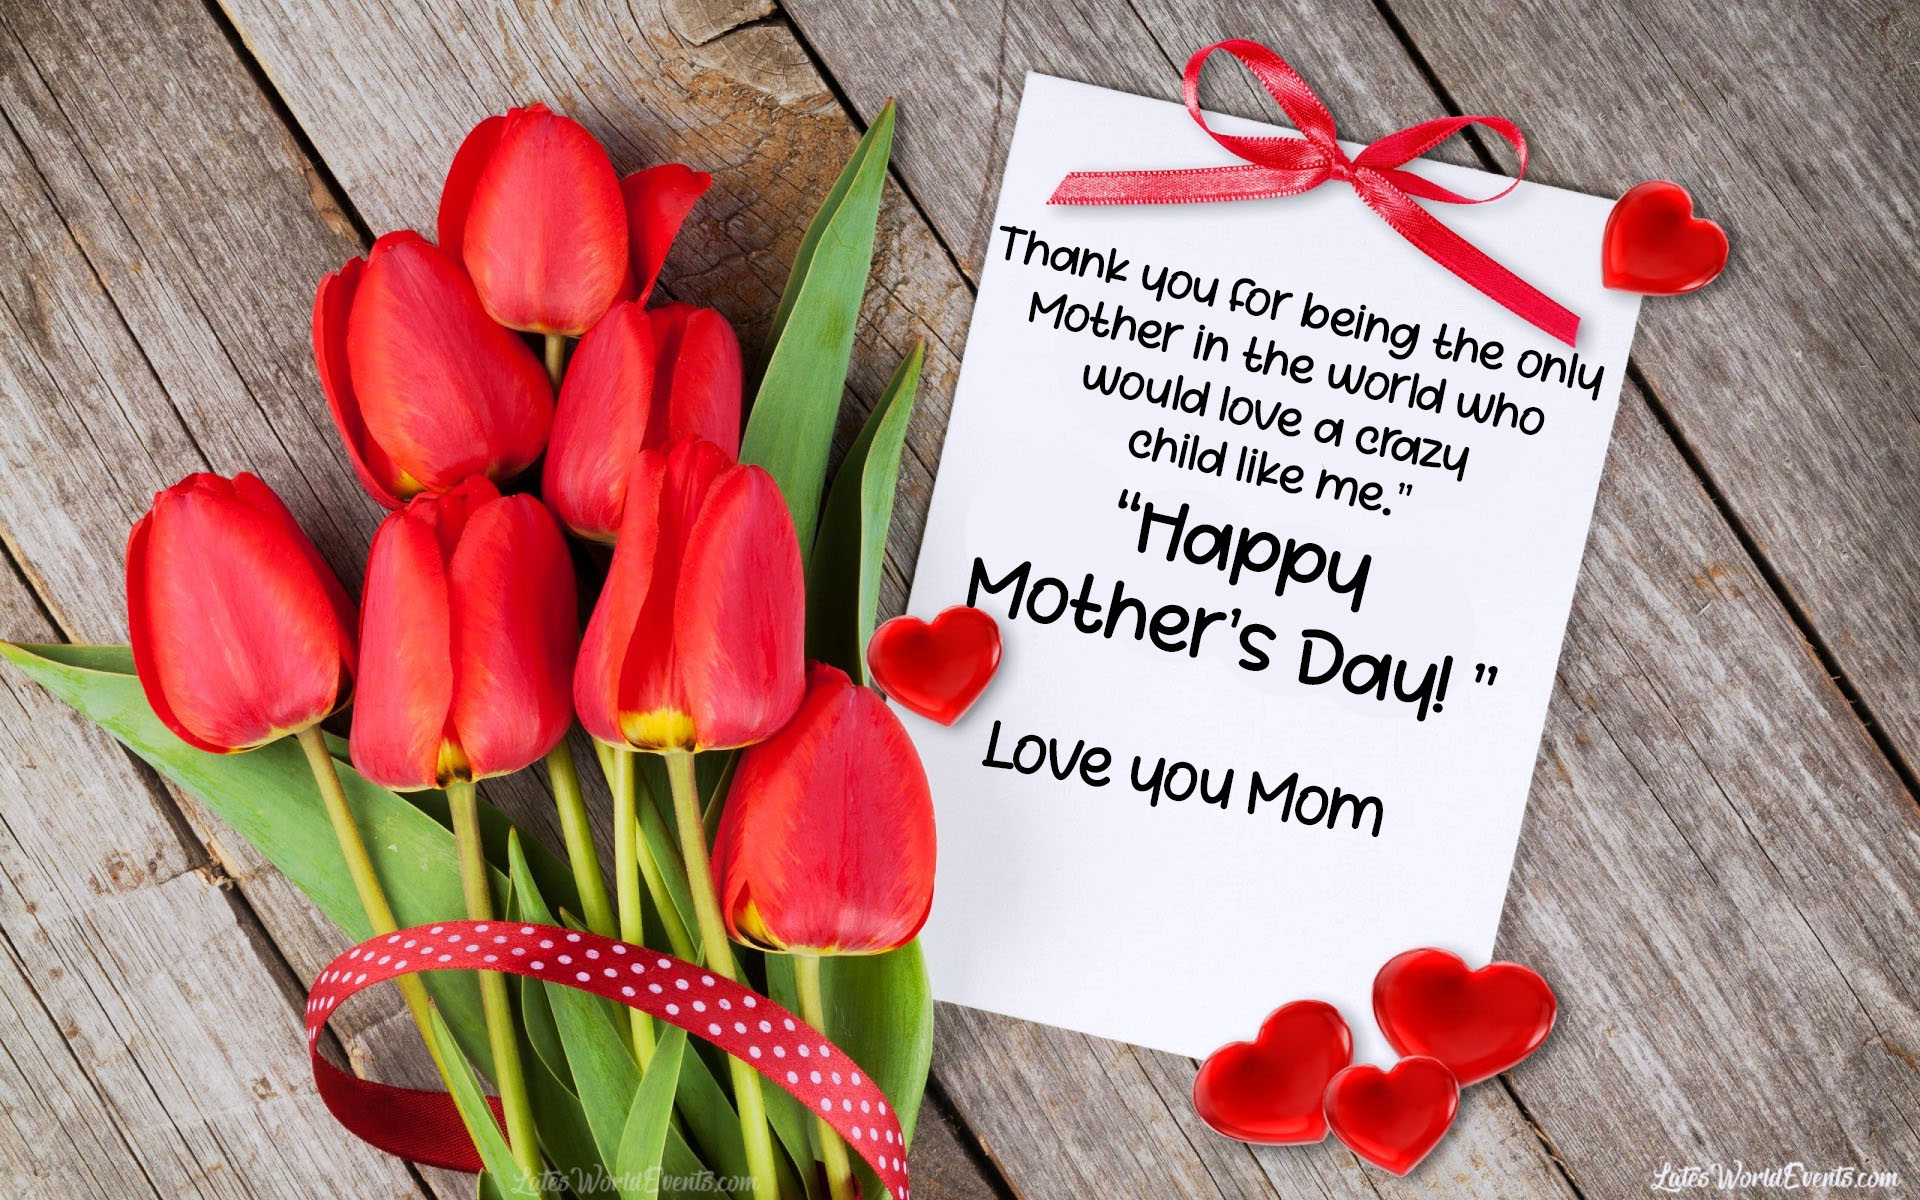 Mother's Day Quotes Messages & Images Download